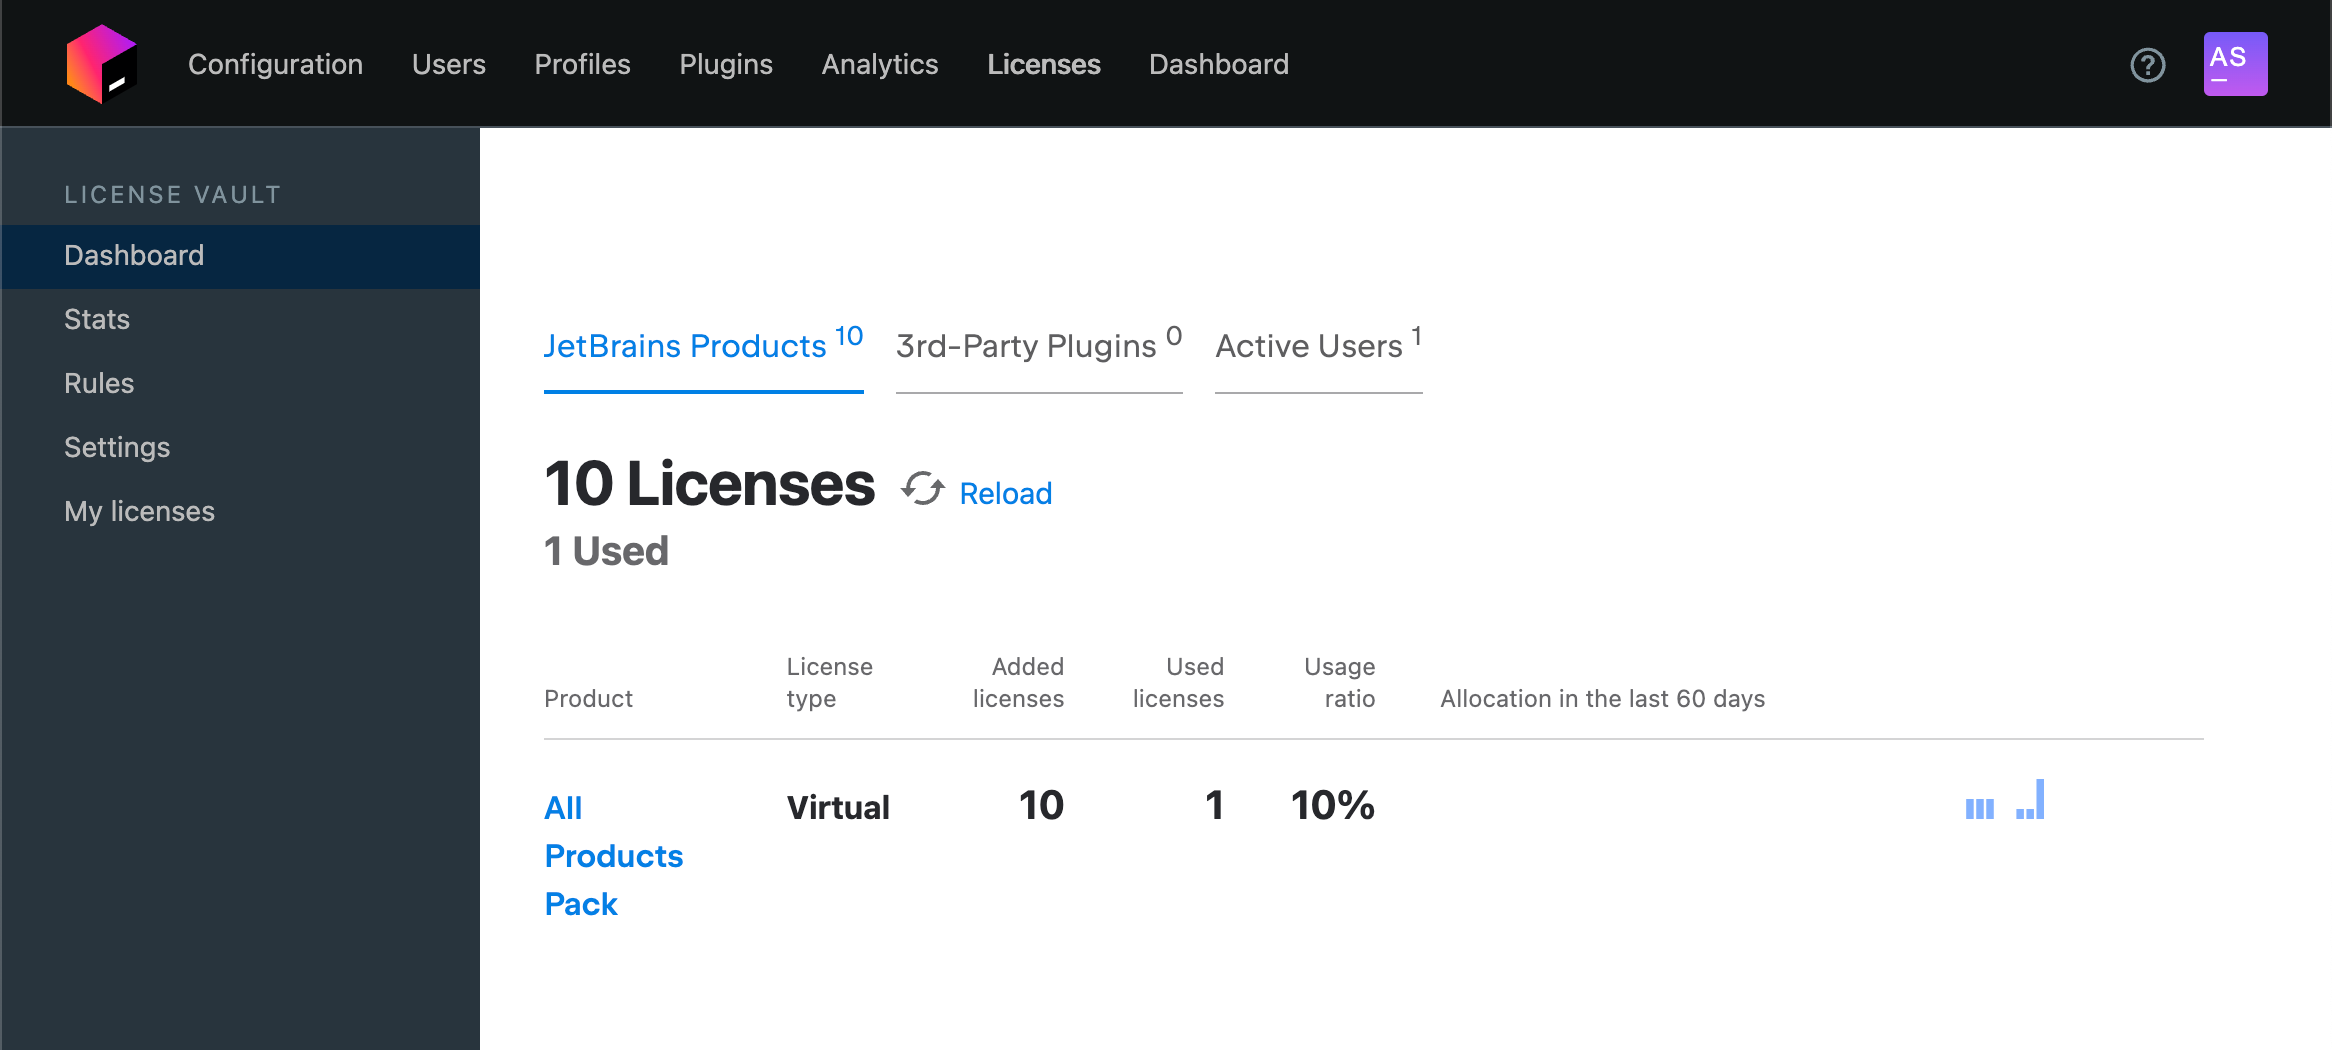 The Licenses page